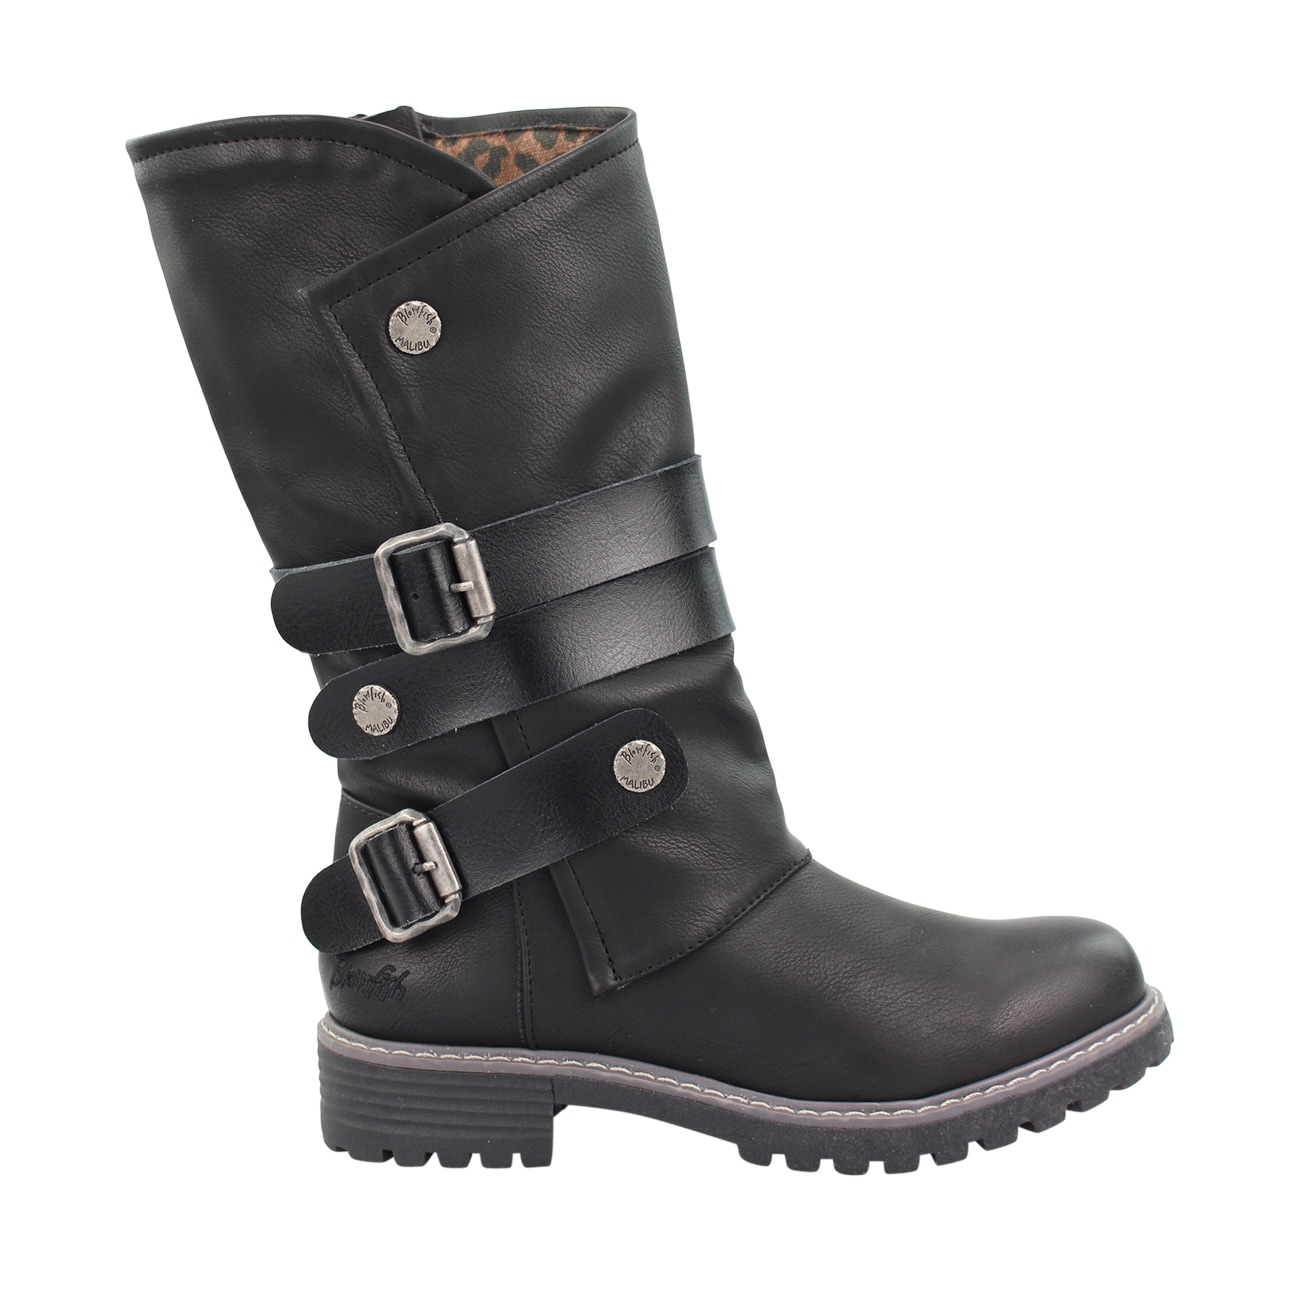 Blowfish Rider Motorcycle Boot | DSW Canada